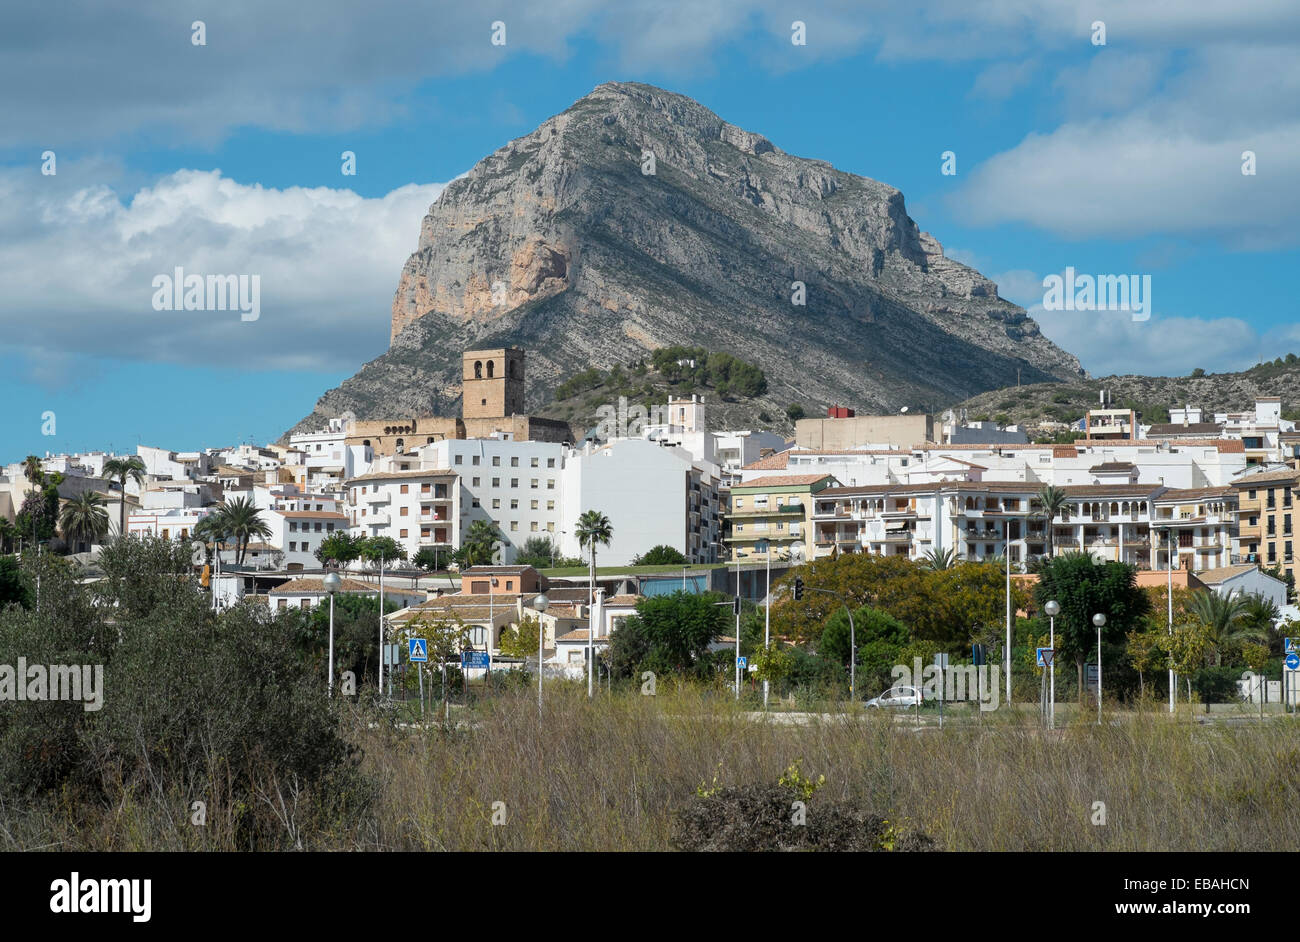 A view of the imposing Montgo mountain, with the town of Javea, Valencia, Spain in the foreground. Stock Photo